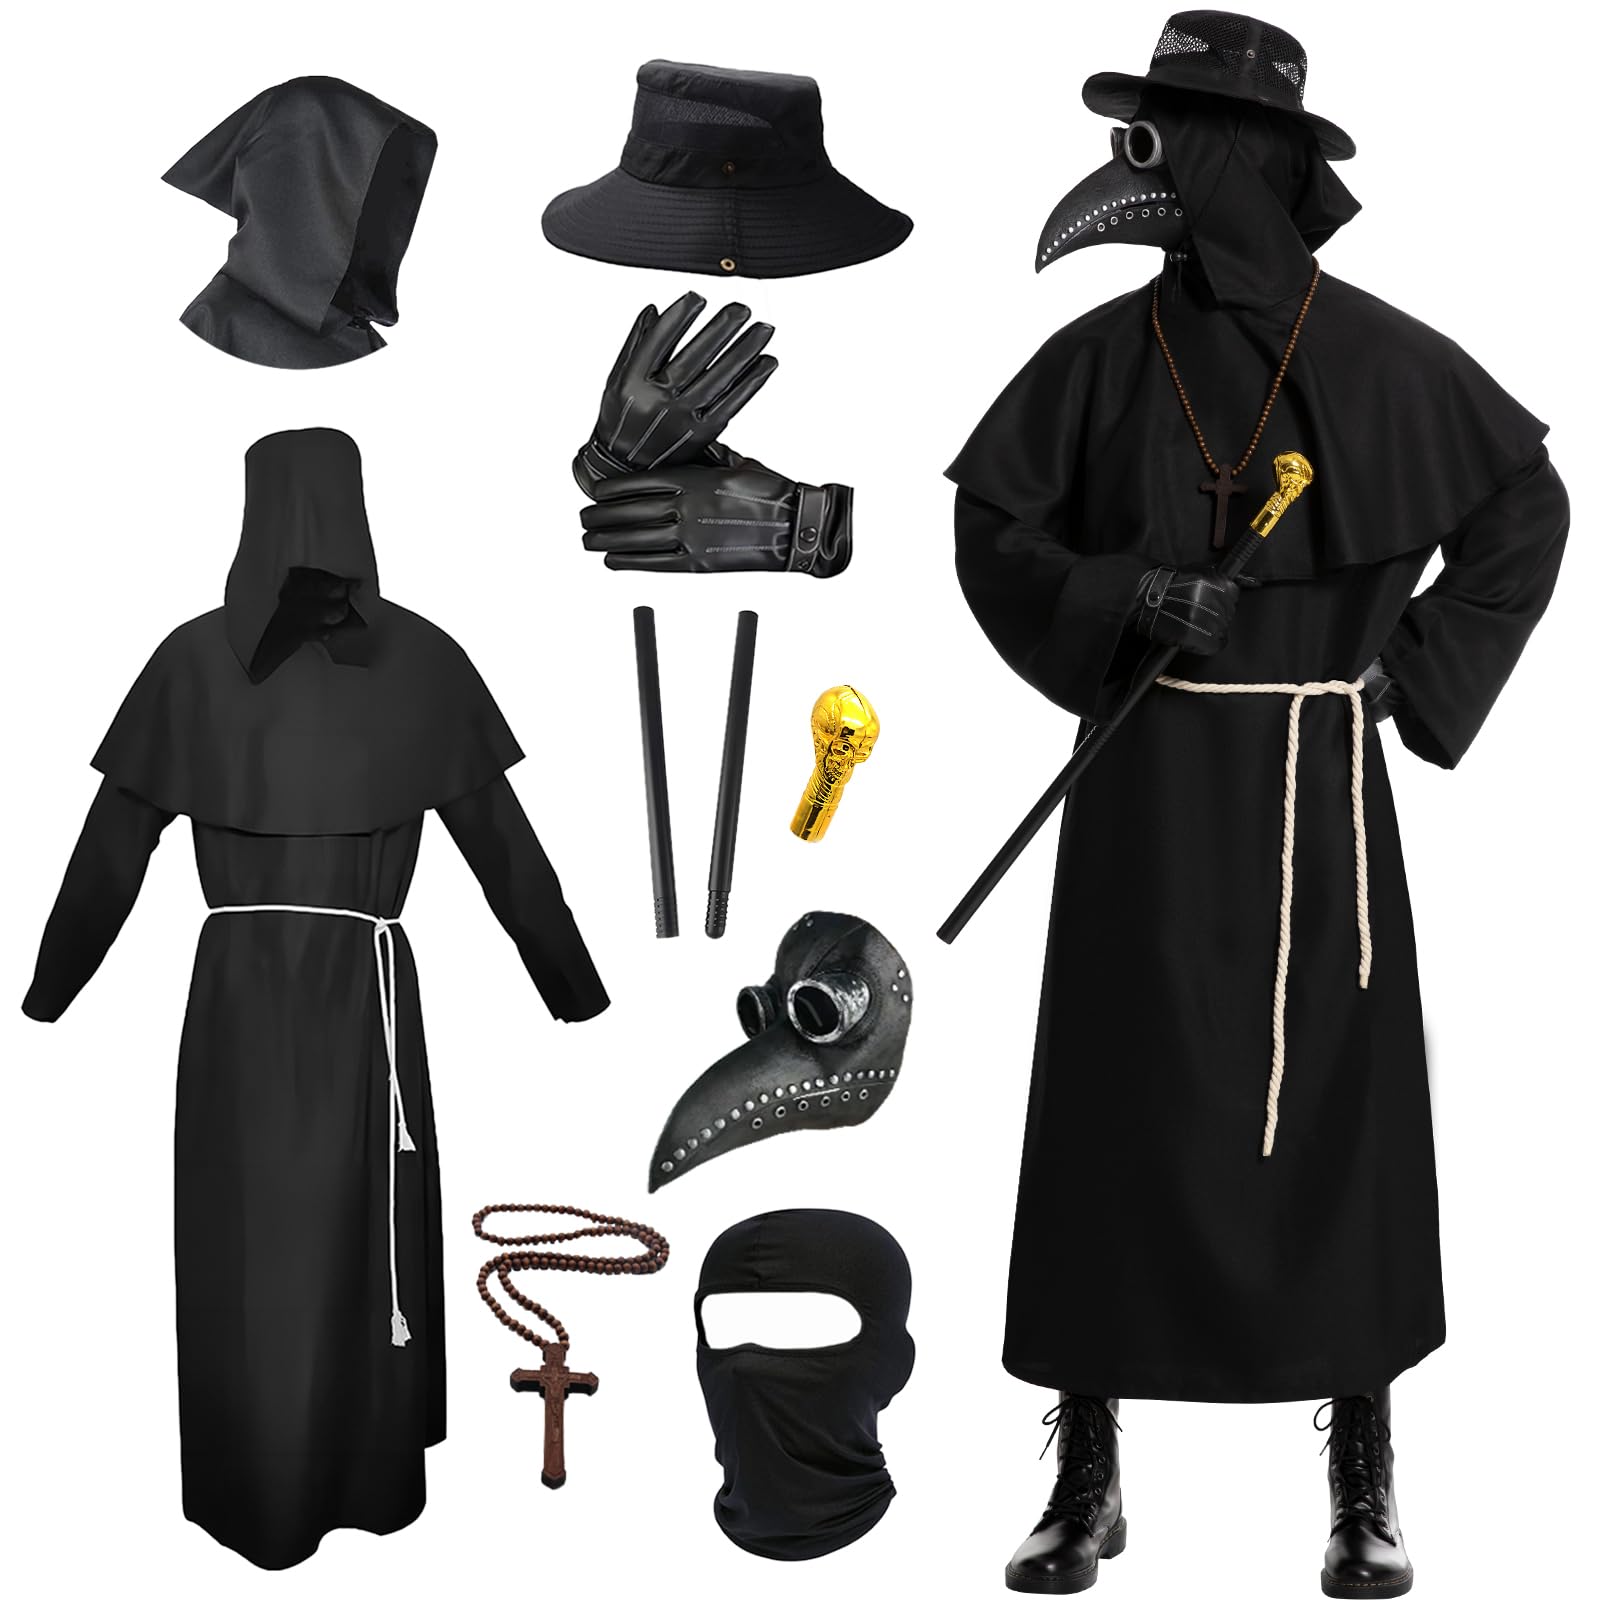 Fooecor Plague Doctor Costume, Adults Plague Doctor Mask Halloween Costume for Women Men Dress-Up Cosplay Party